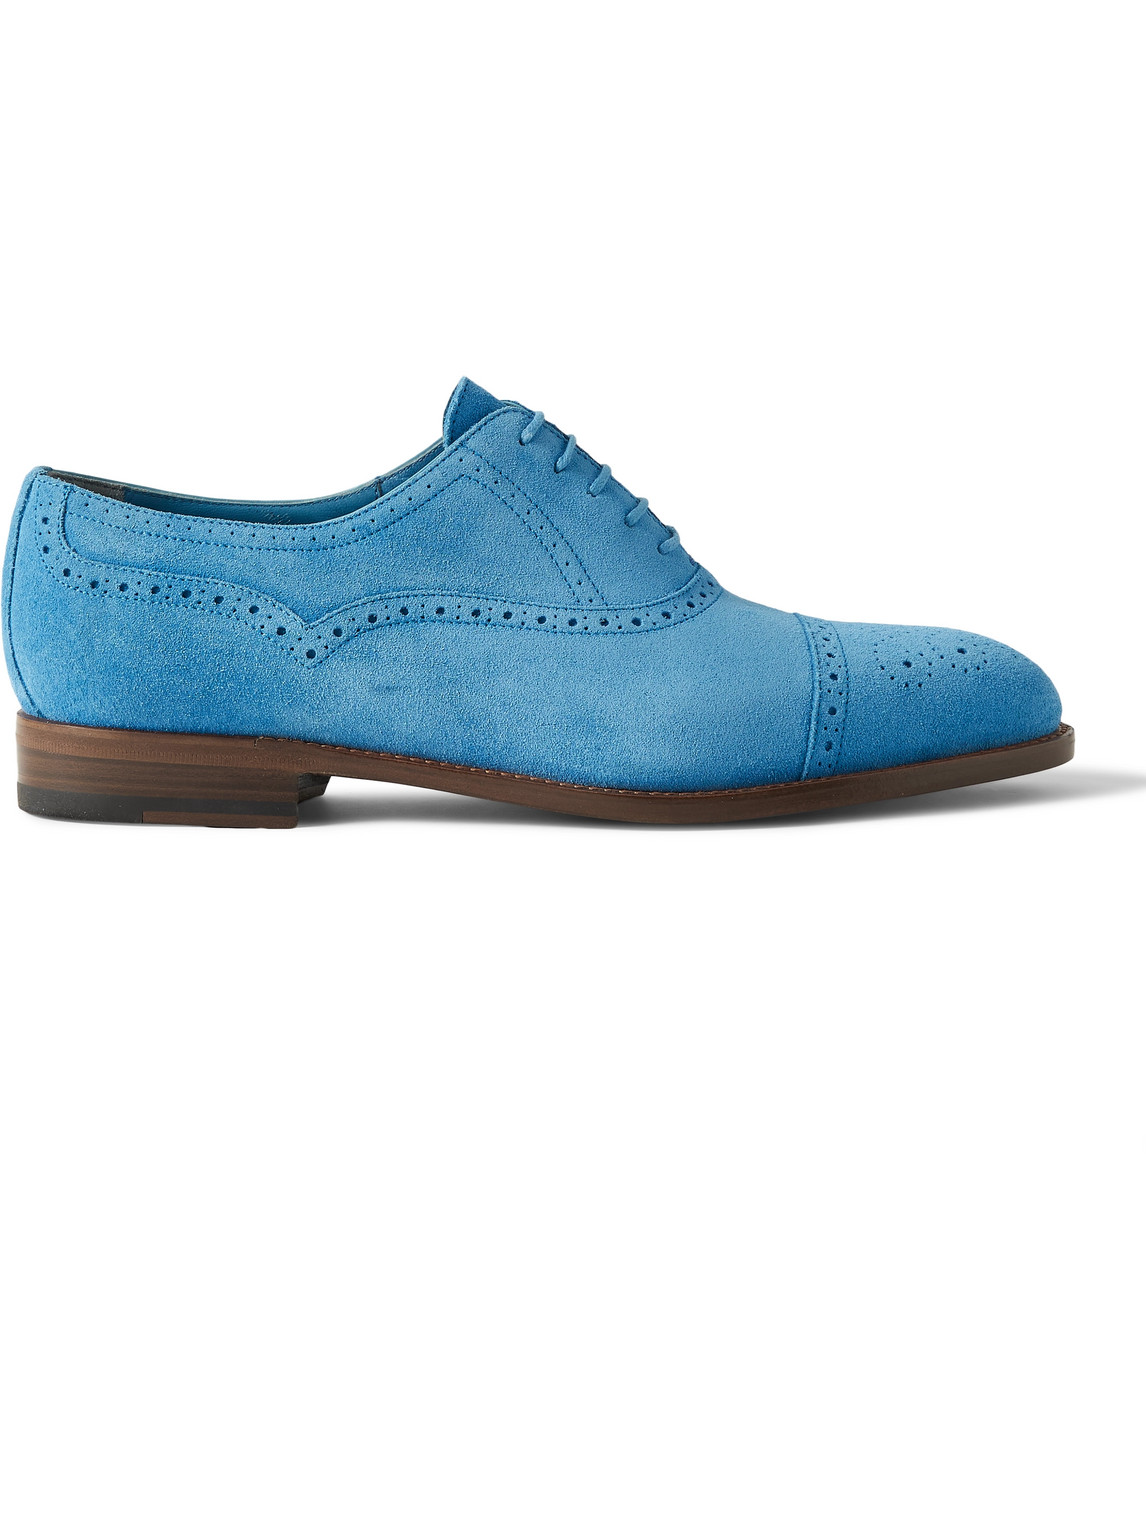 Witney Suede Oxford Brogues